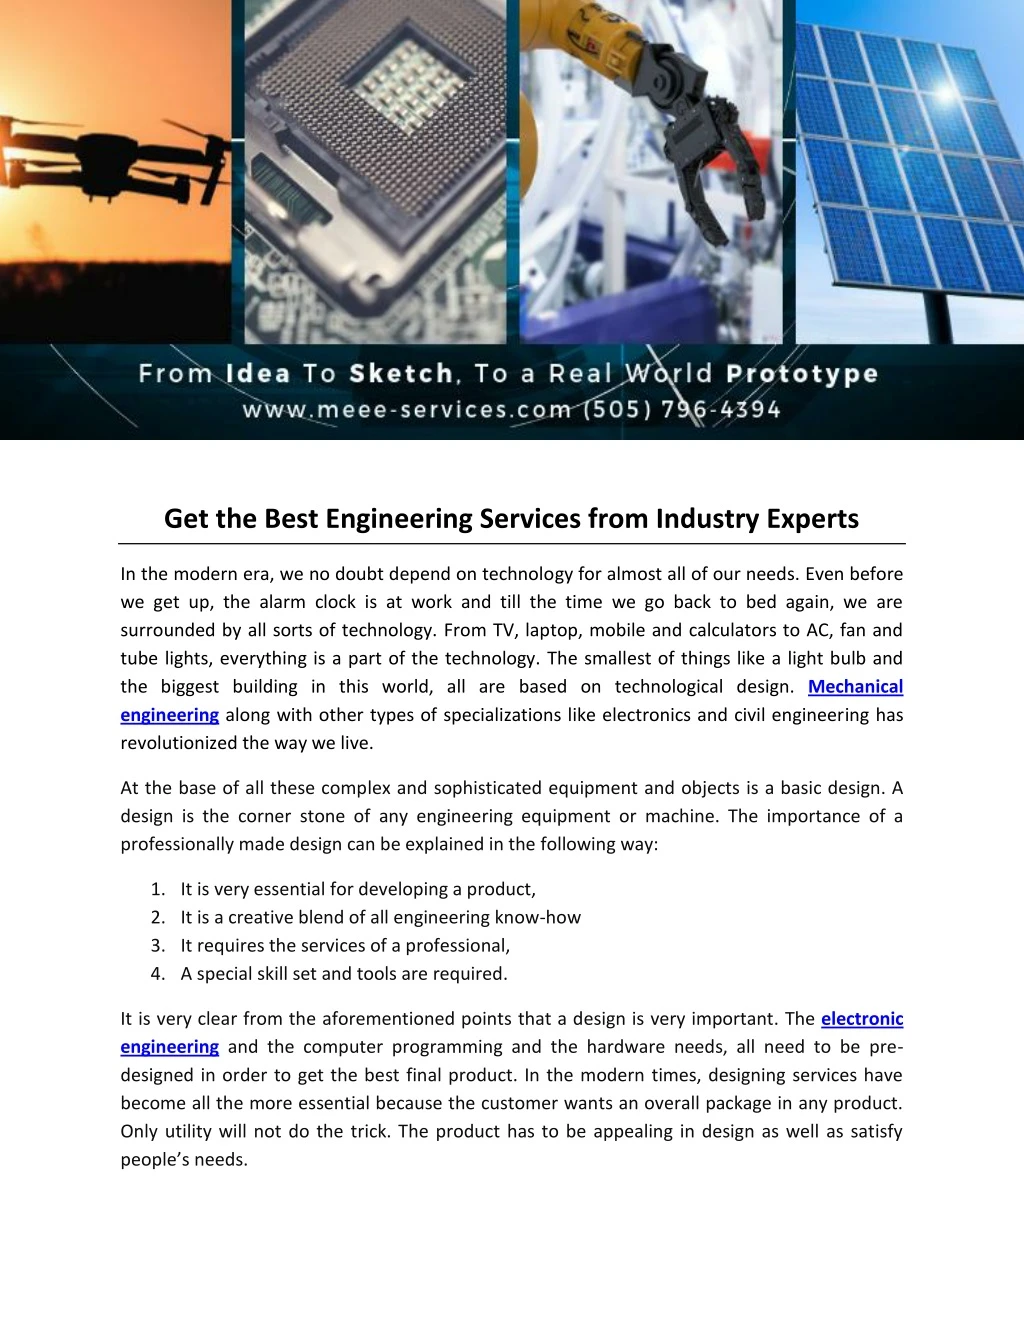 get the best engineering services from industry